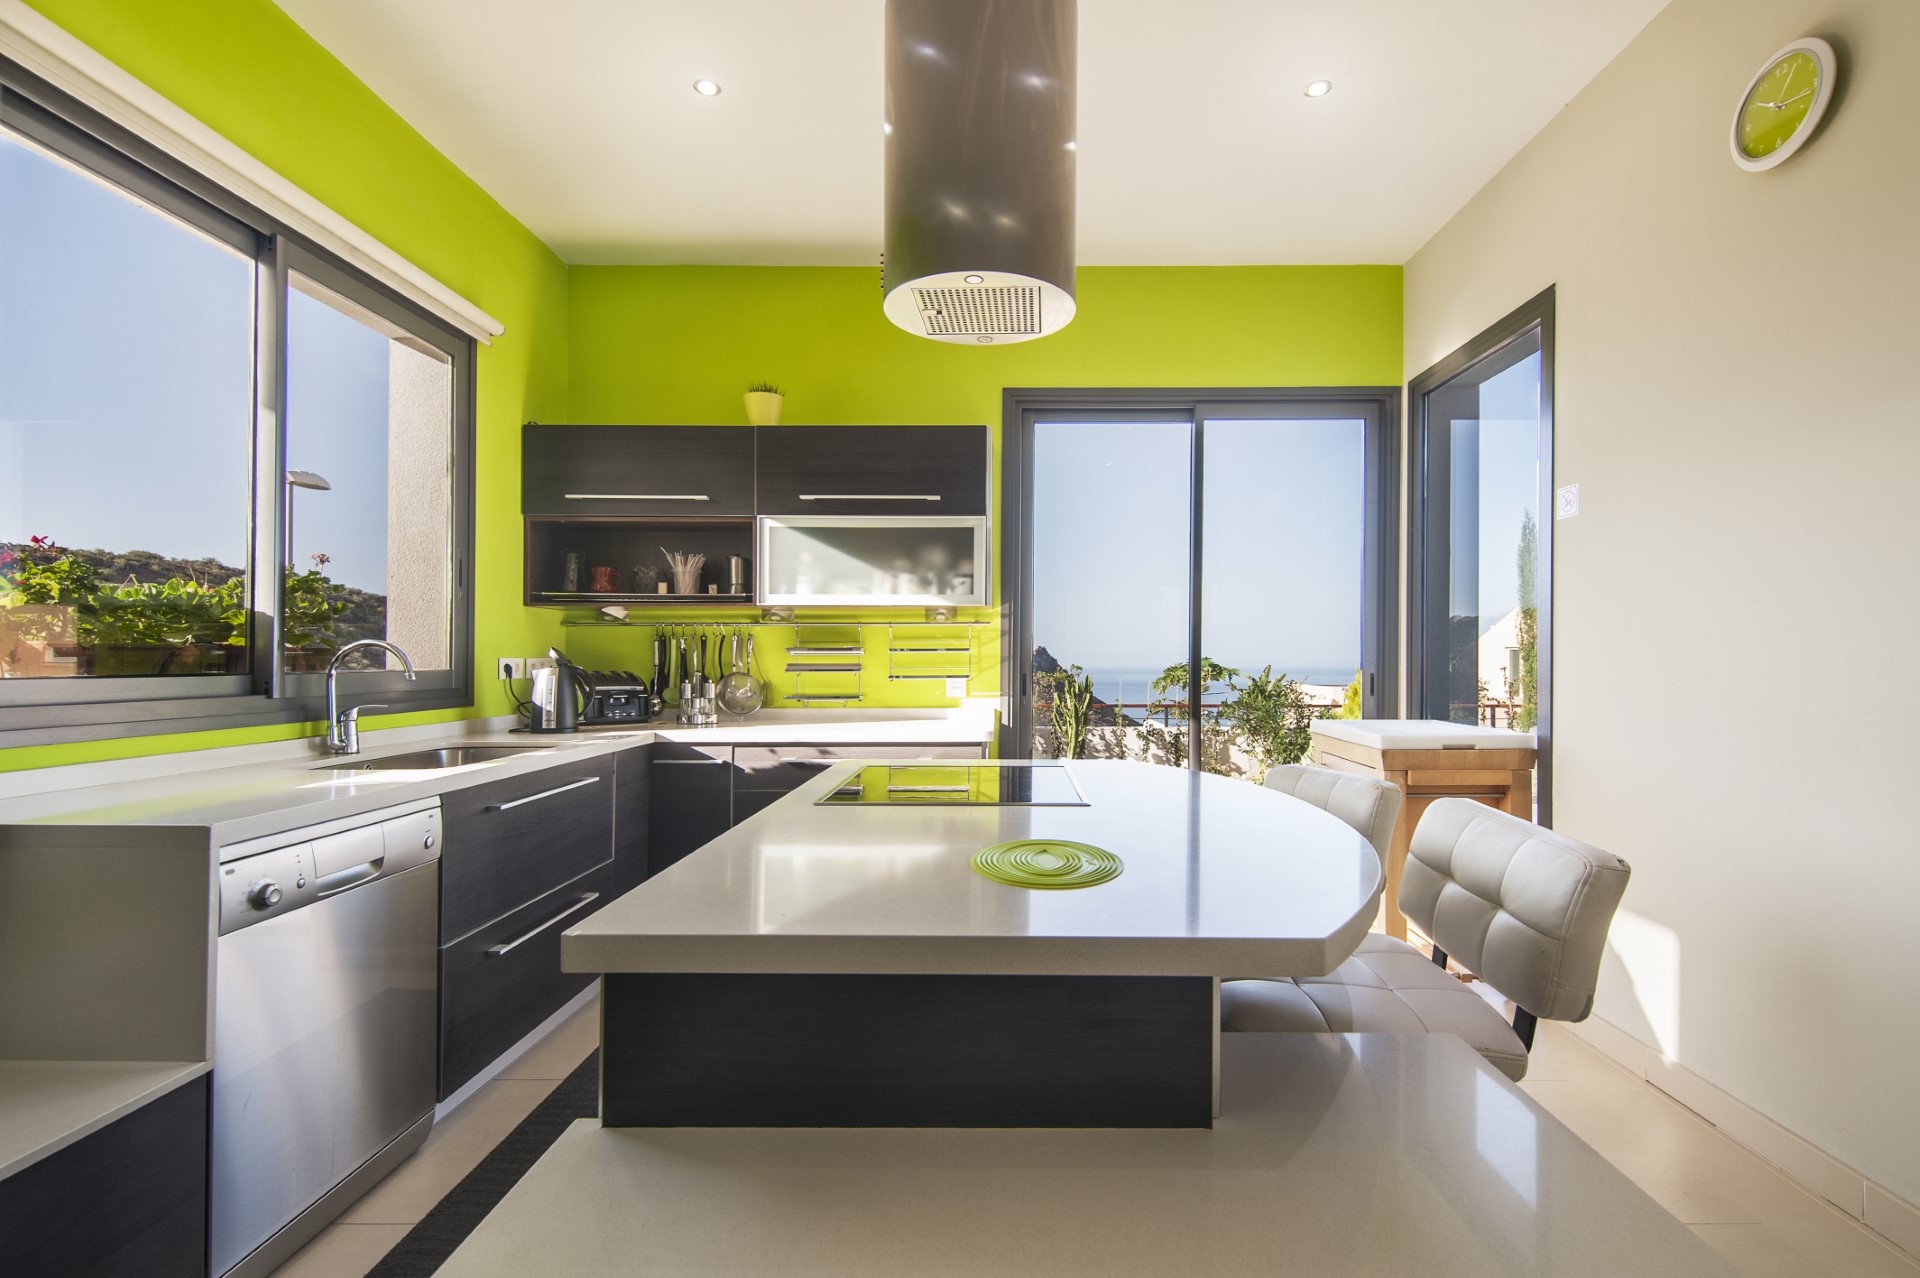 This trendy modern beachhouse theme uses a bright neon green color scheme that helps build excitement every time you walk in. This isn't the decor for the faint of heart, but personally, I would totally go for it.